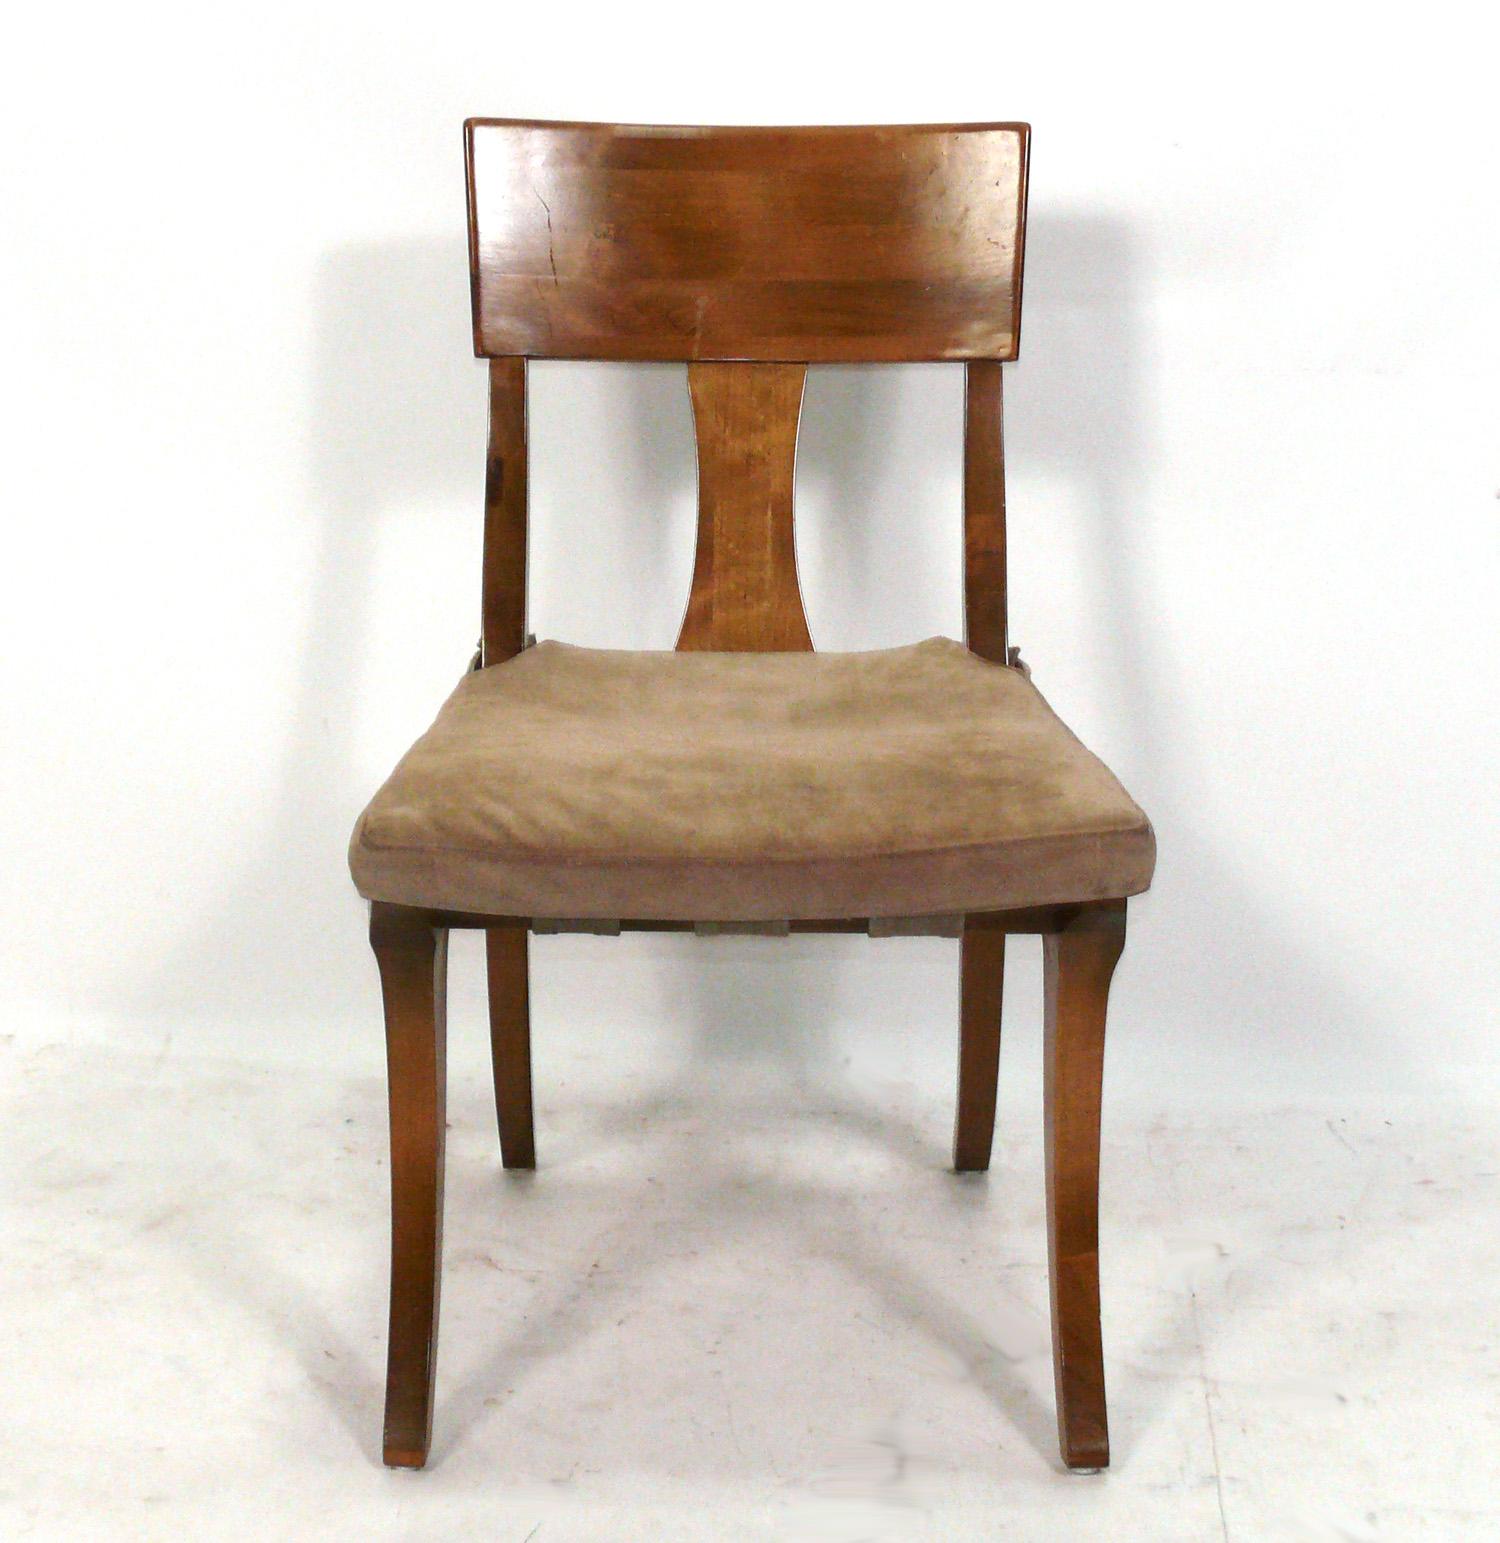 Set of Eight Klismos Dining Chairs, in the manner of T.H. Robsjohn Gibbings, and made by Kreiss, circa 2000s. The seat cushions are currently being reupholstered and can be completed in your fabric. SImply send us 6 yards total of your fabric after